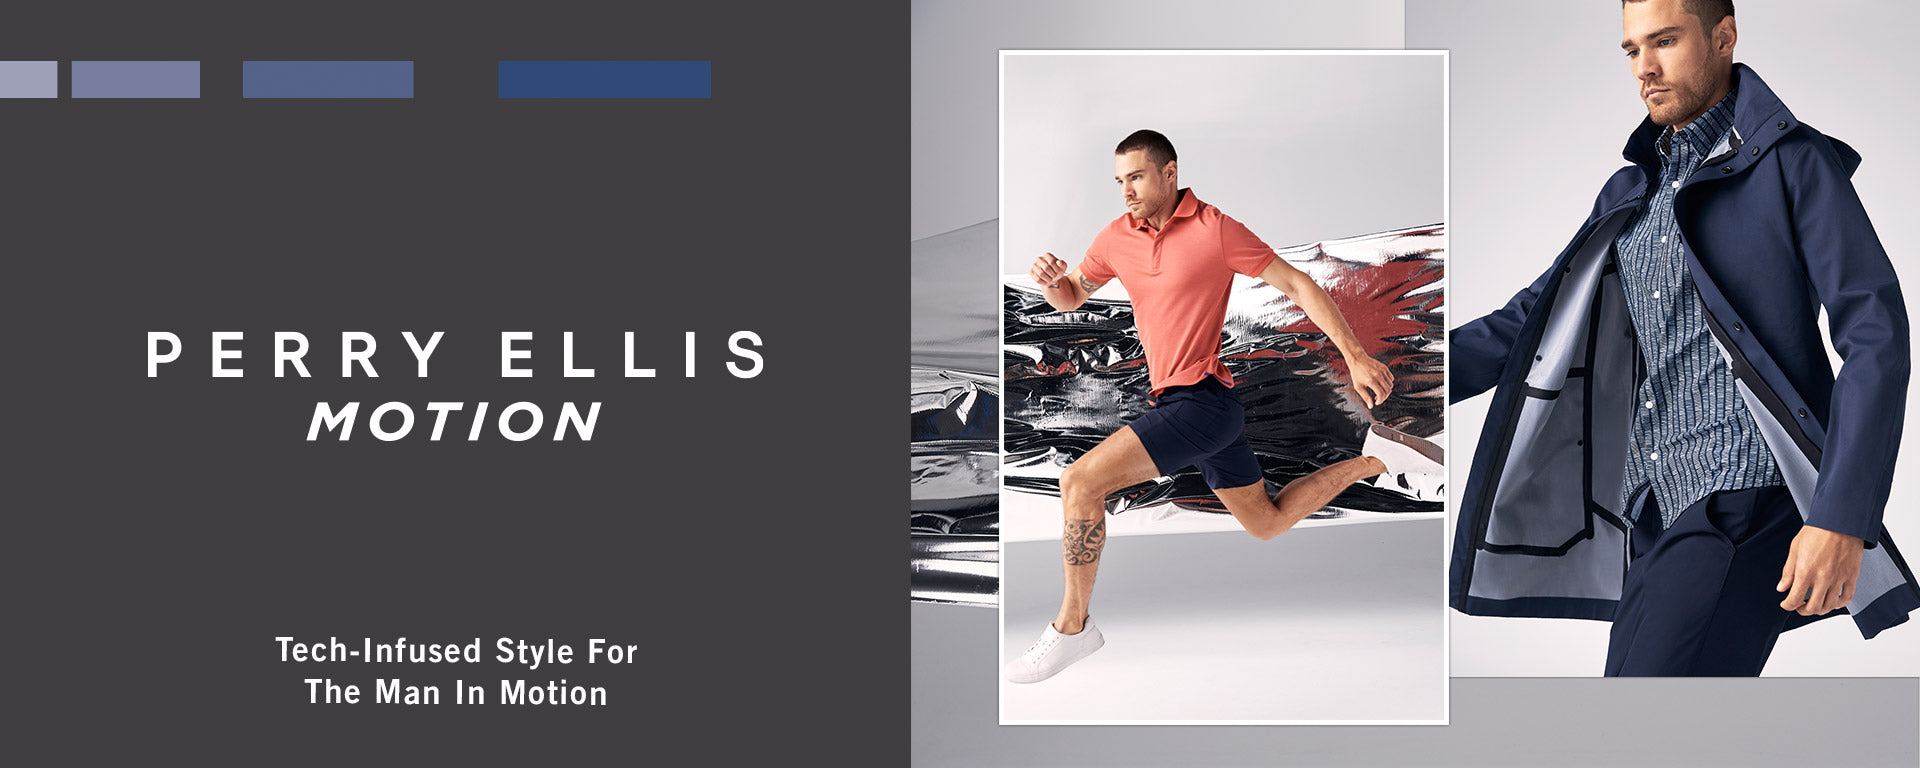 Perry Ellis Motion  Official Brand Website